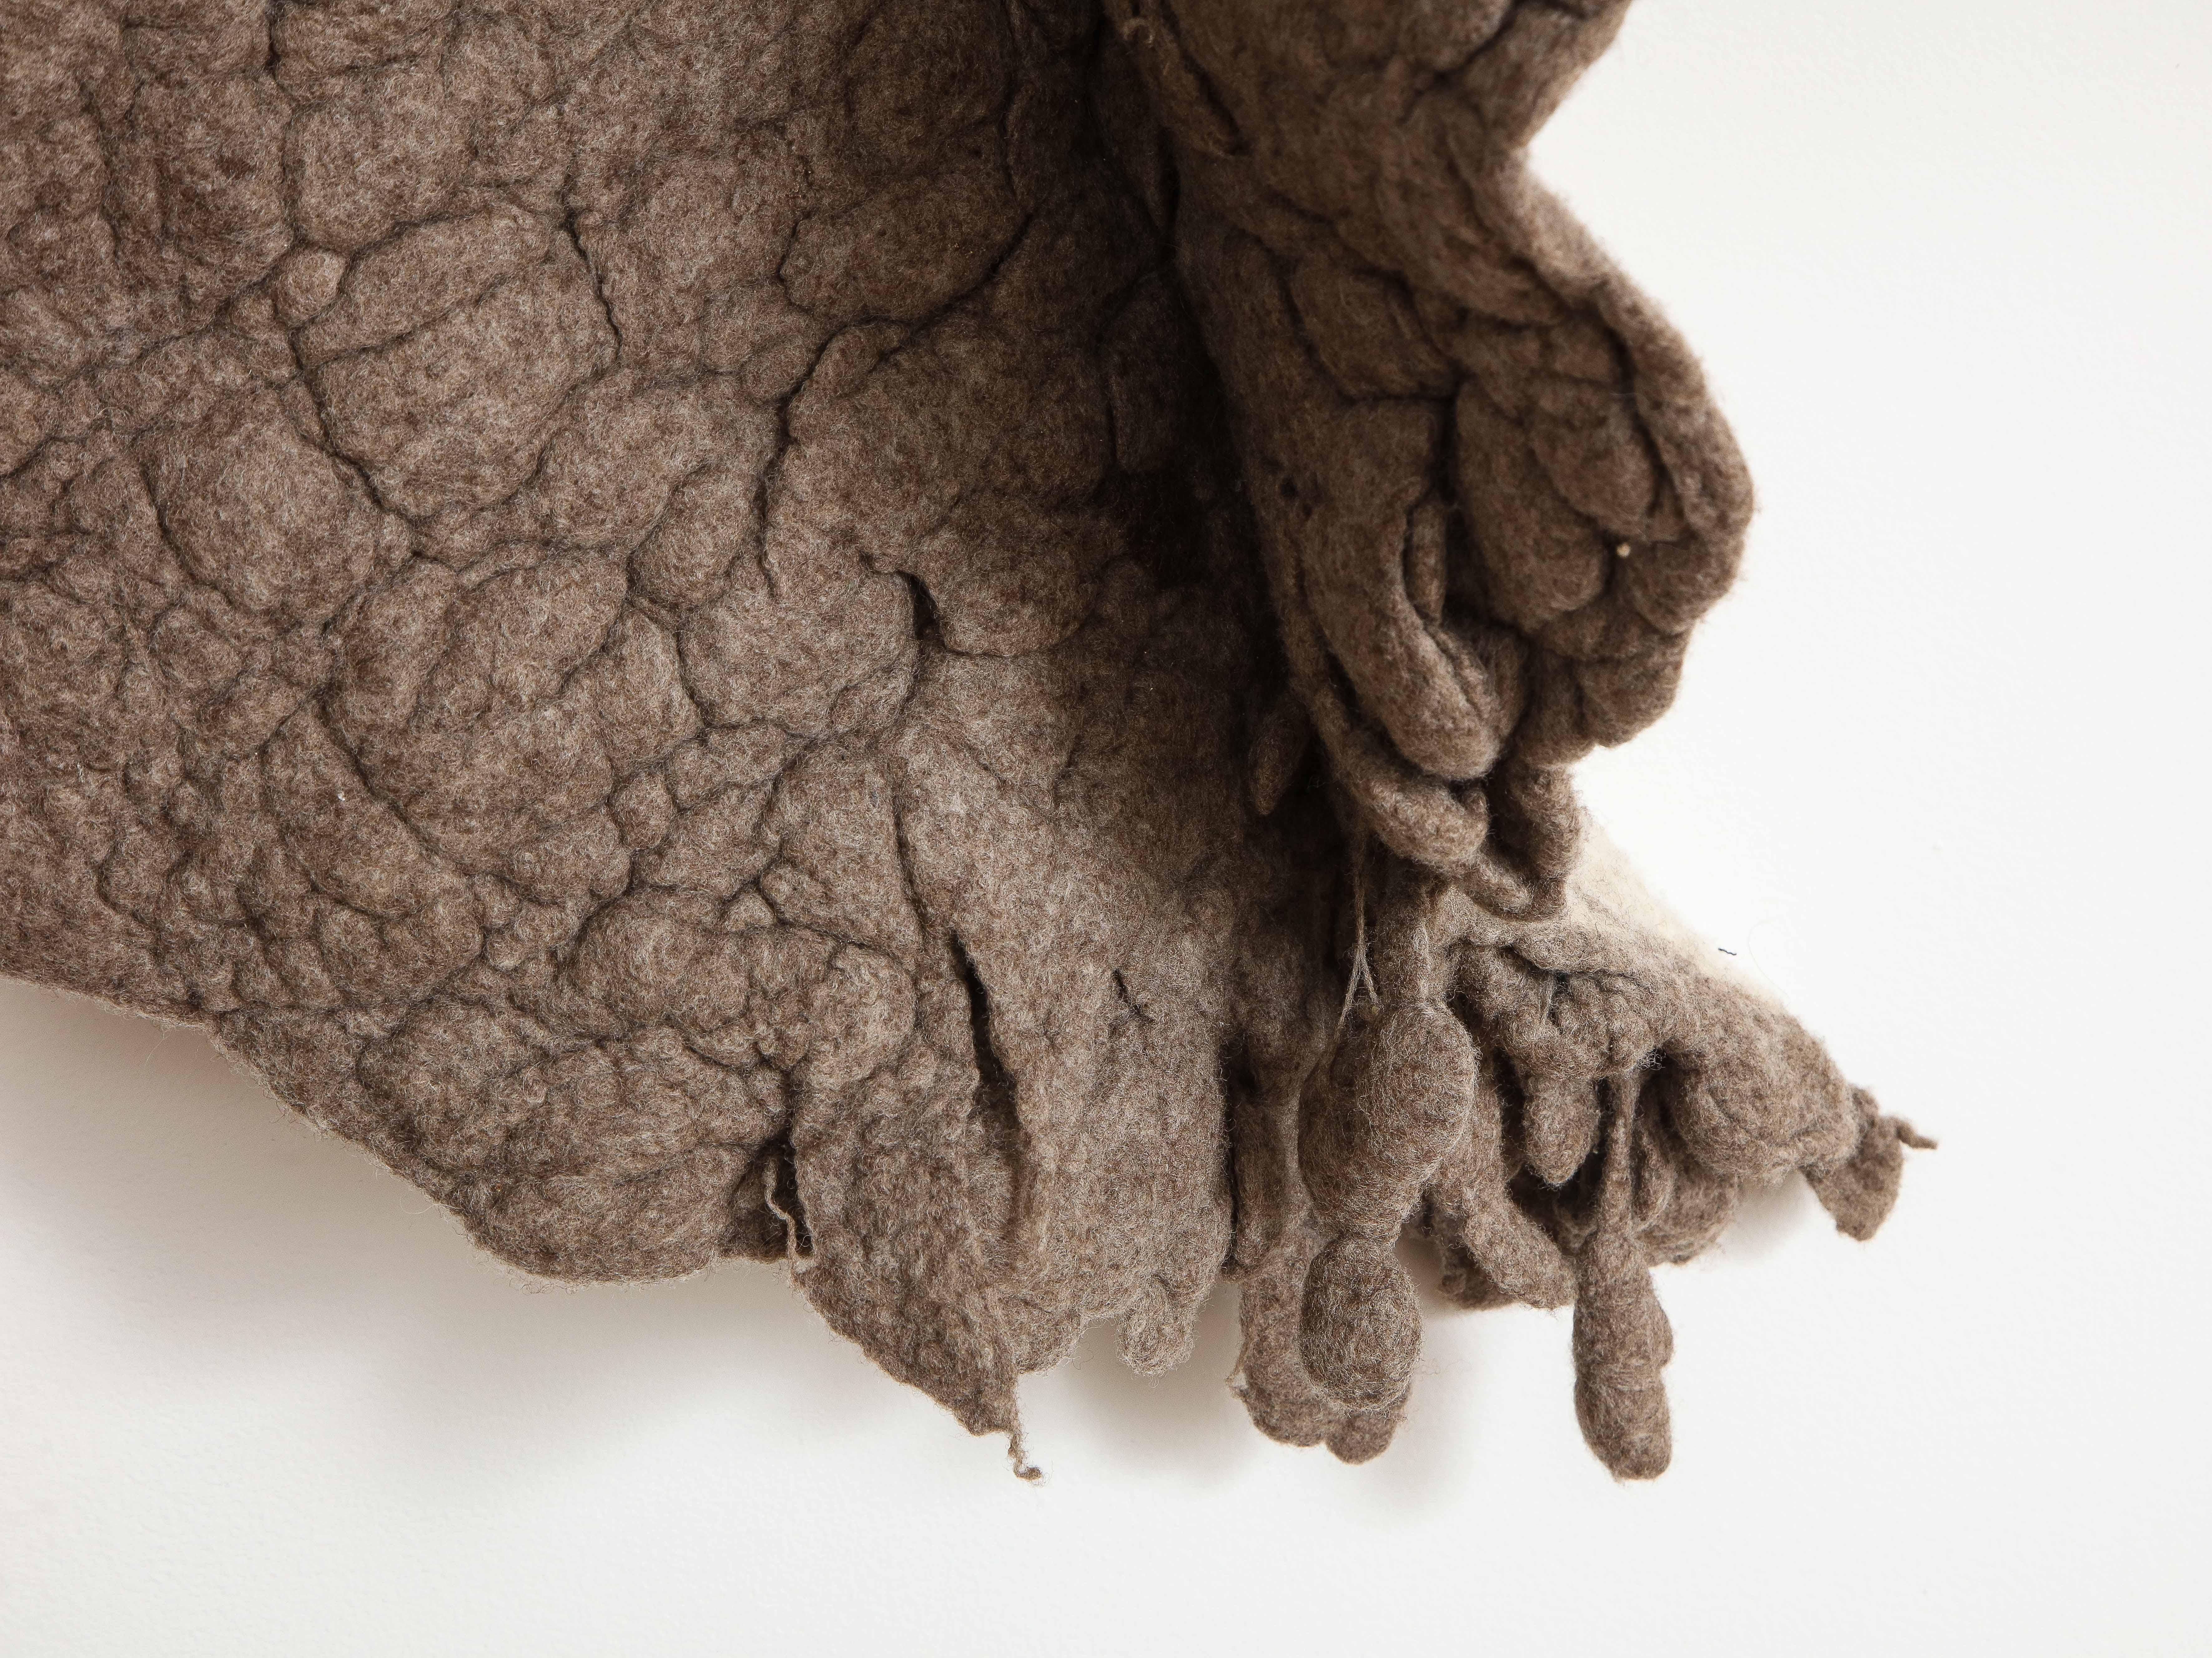 Rustic Giant Leaf, Naturally Dyed Felted Wool Sculpture by Inês Schertel, Brazil, 2019 For Sale